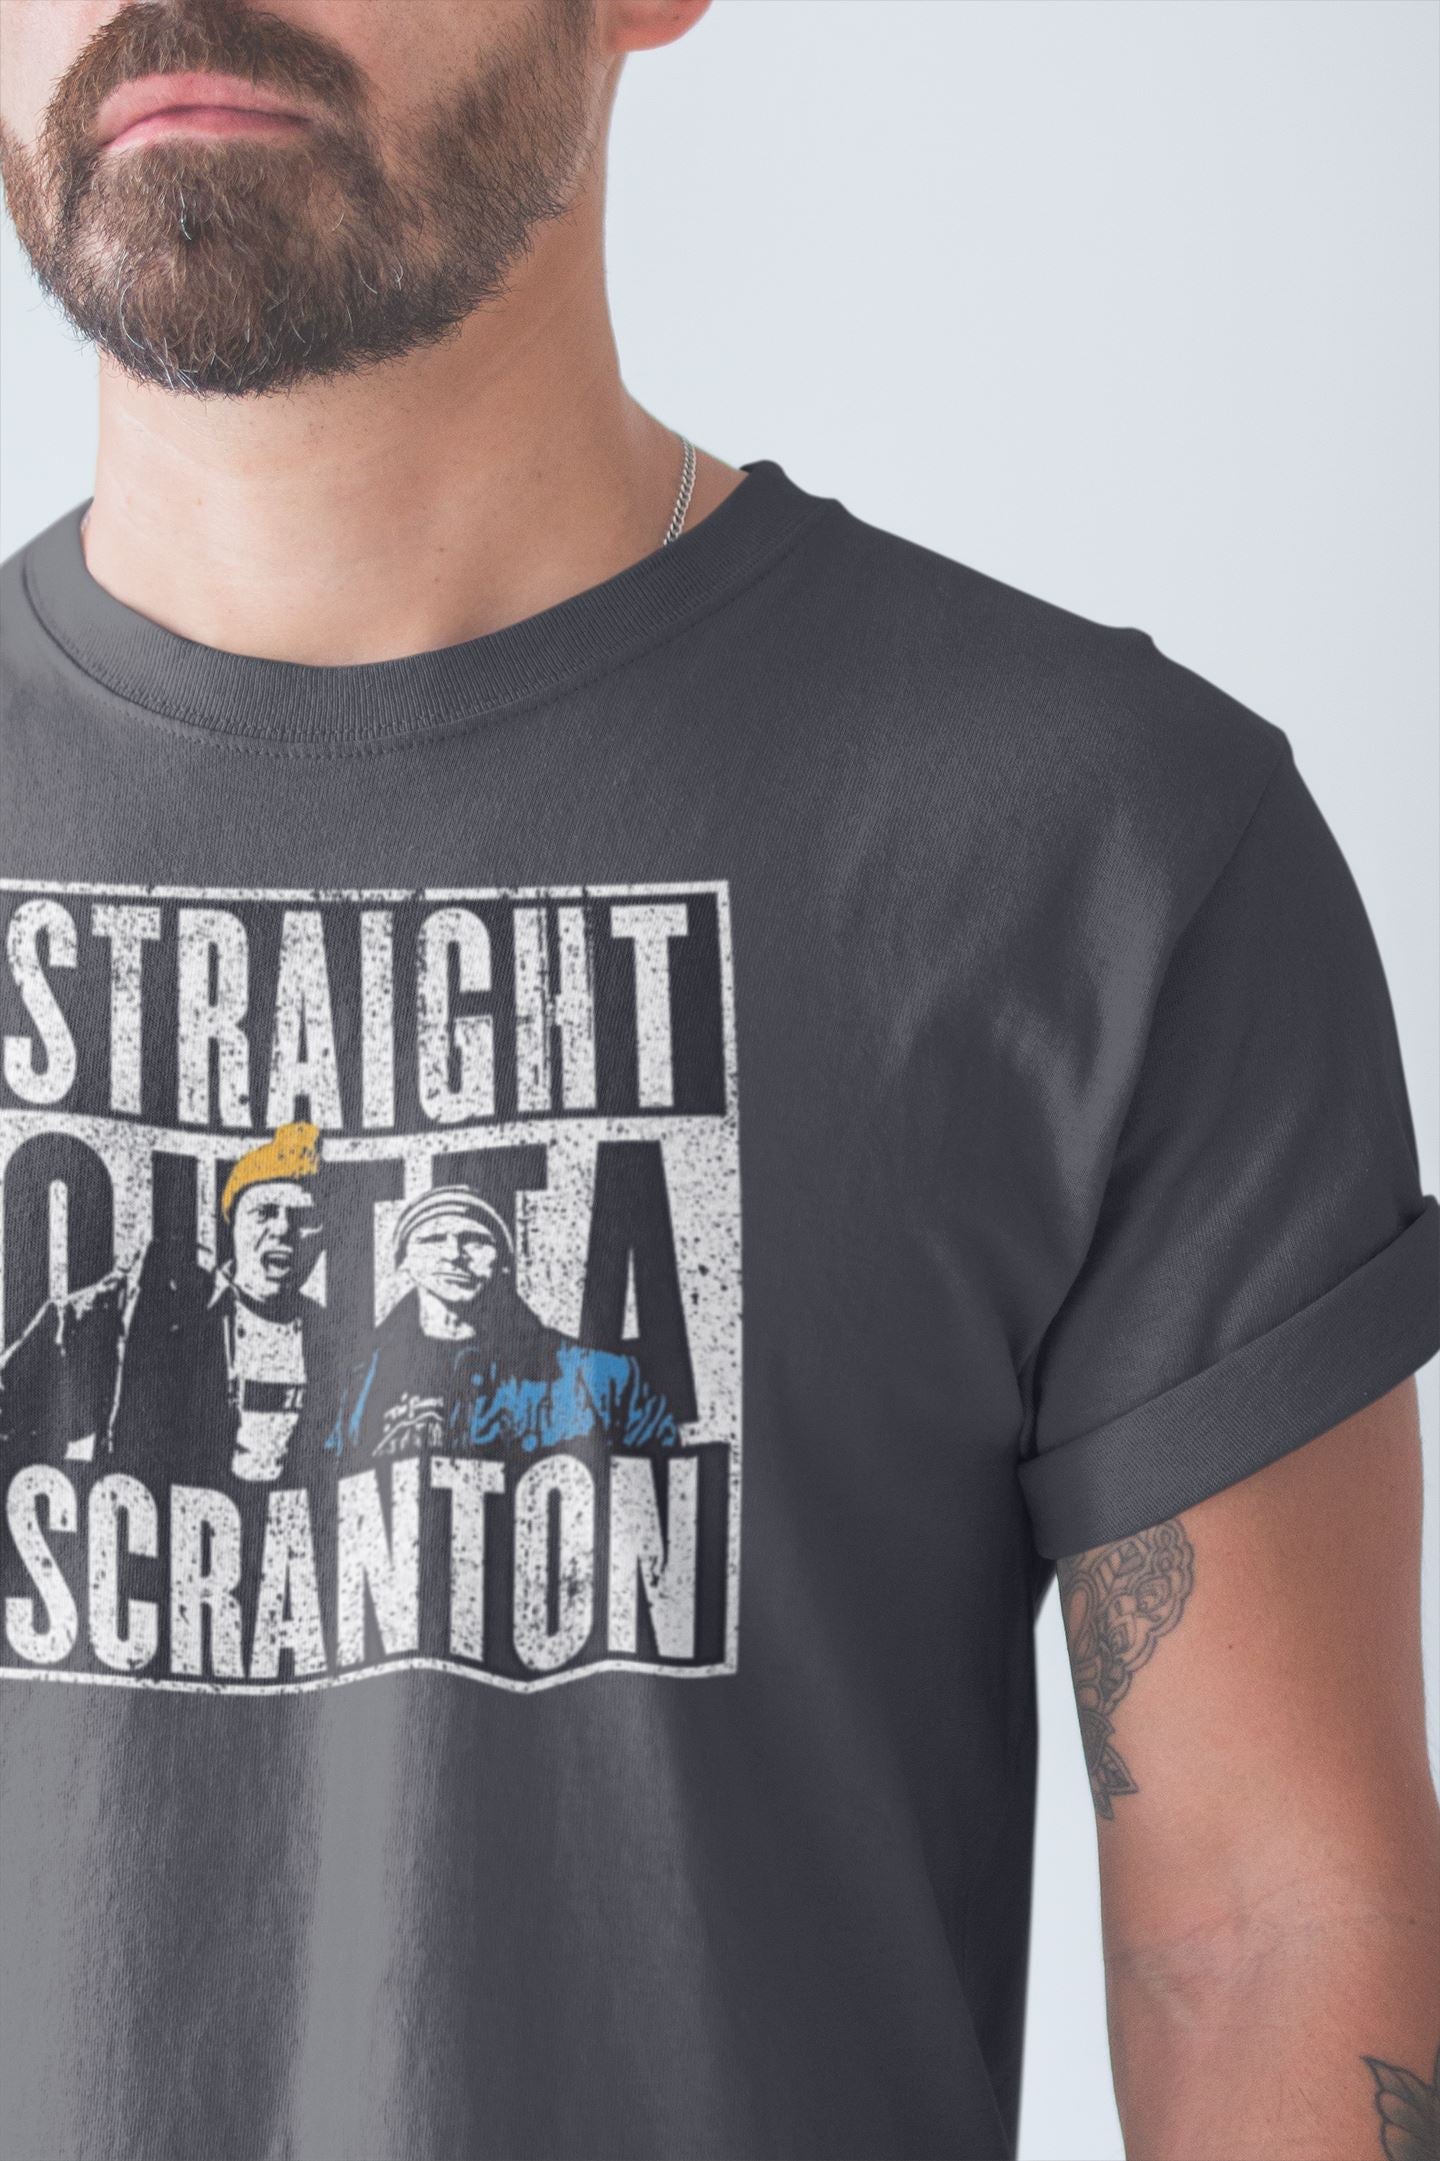 Straight Outta Scranton The Electric City Official "The Office" T Shirt for Men and Women freeshipping - Catch My Drift India